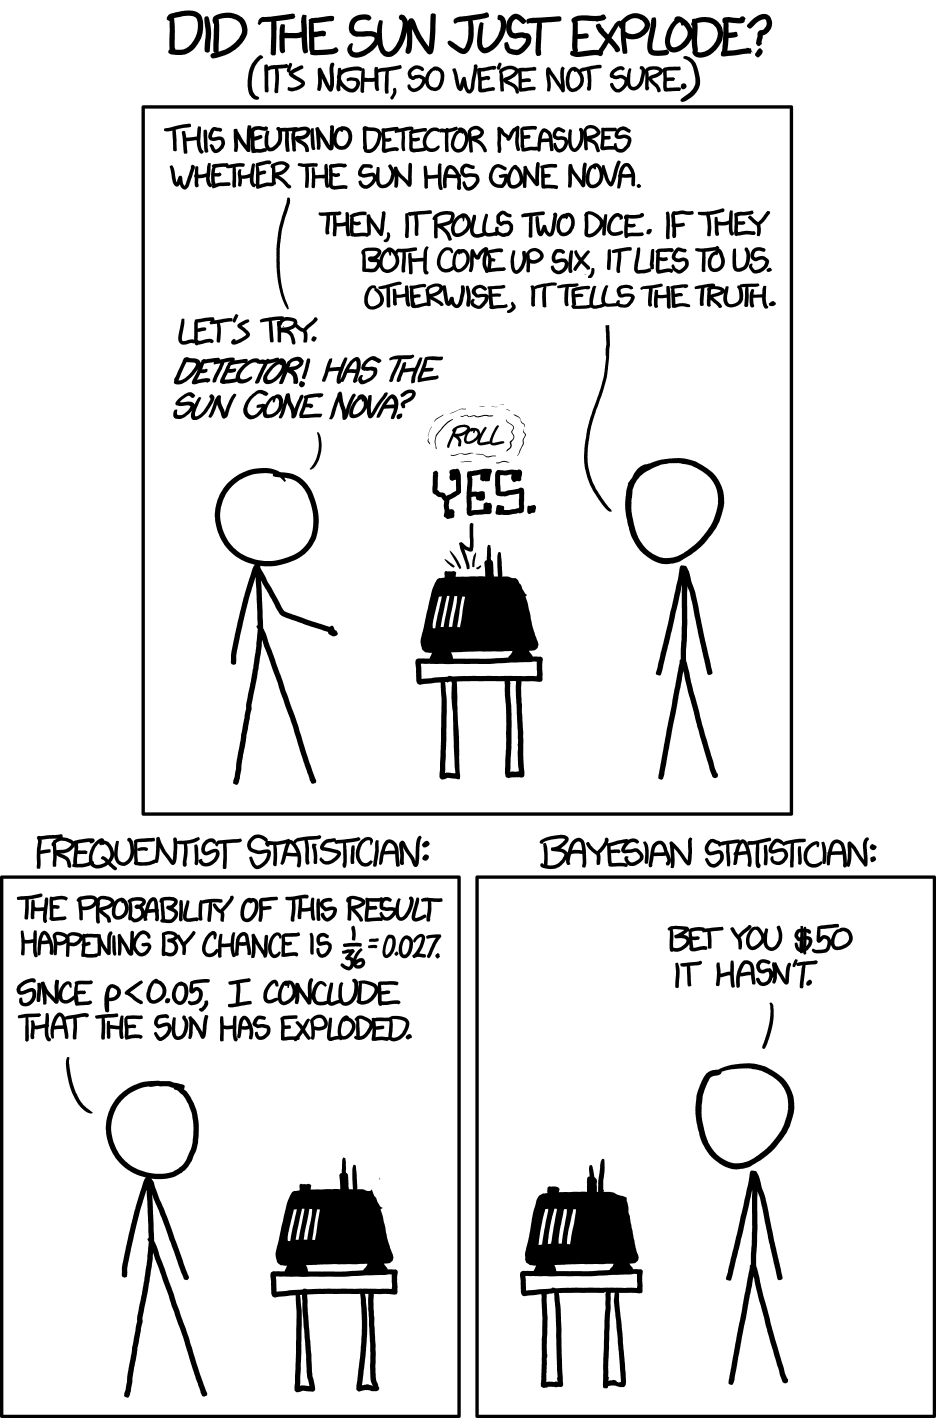 The Bayesian vs Frequentist Debate: Uniquenesses